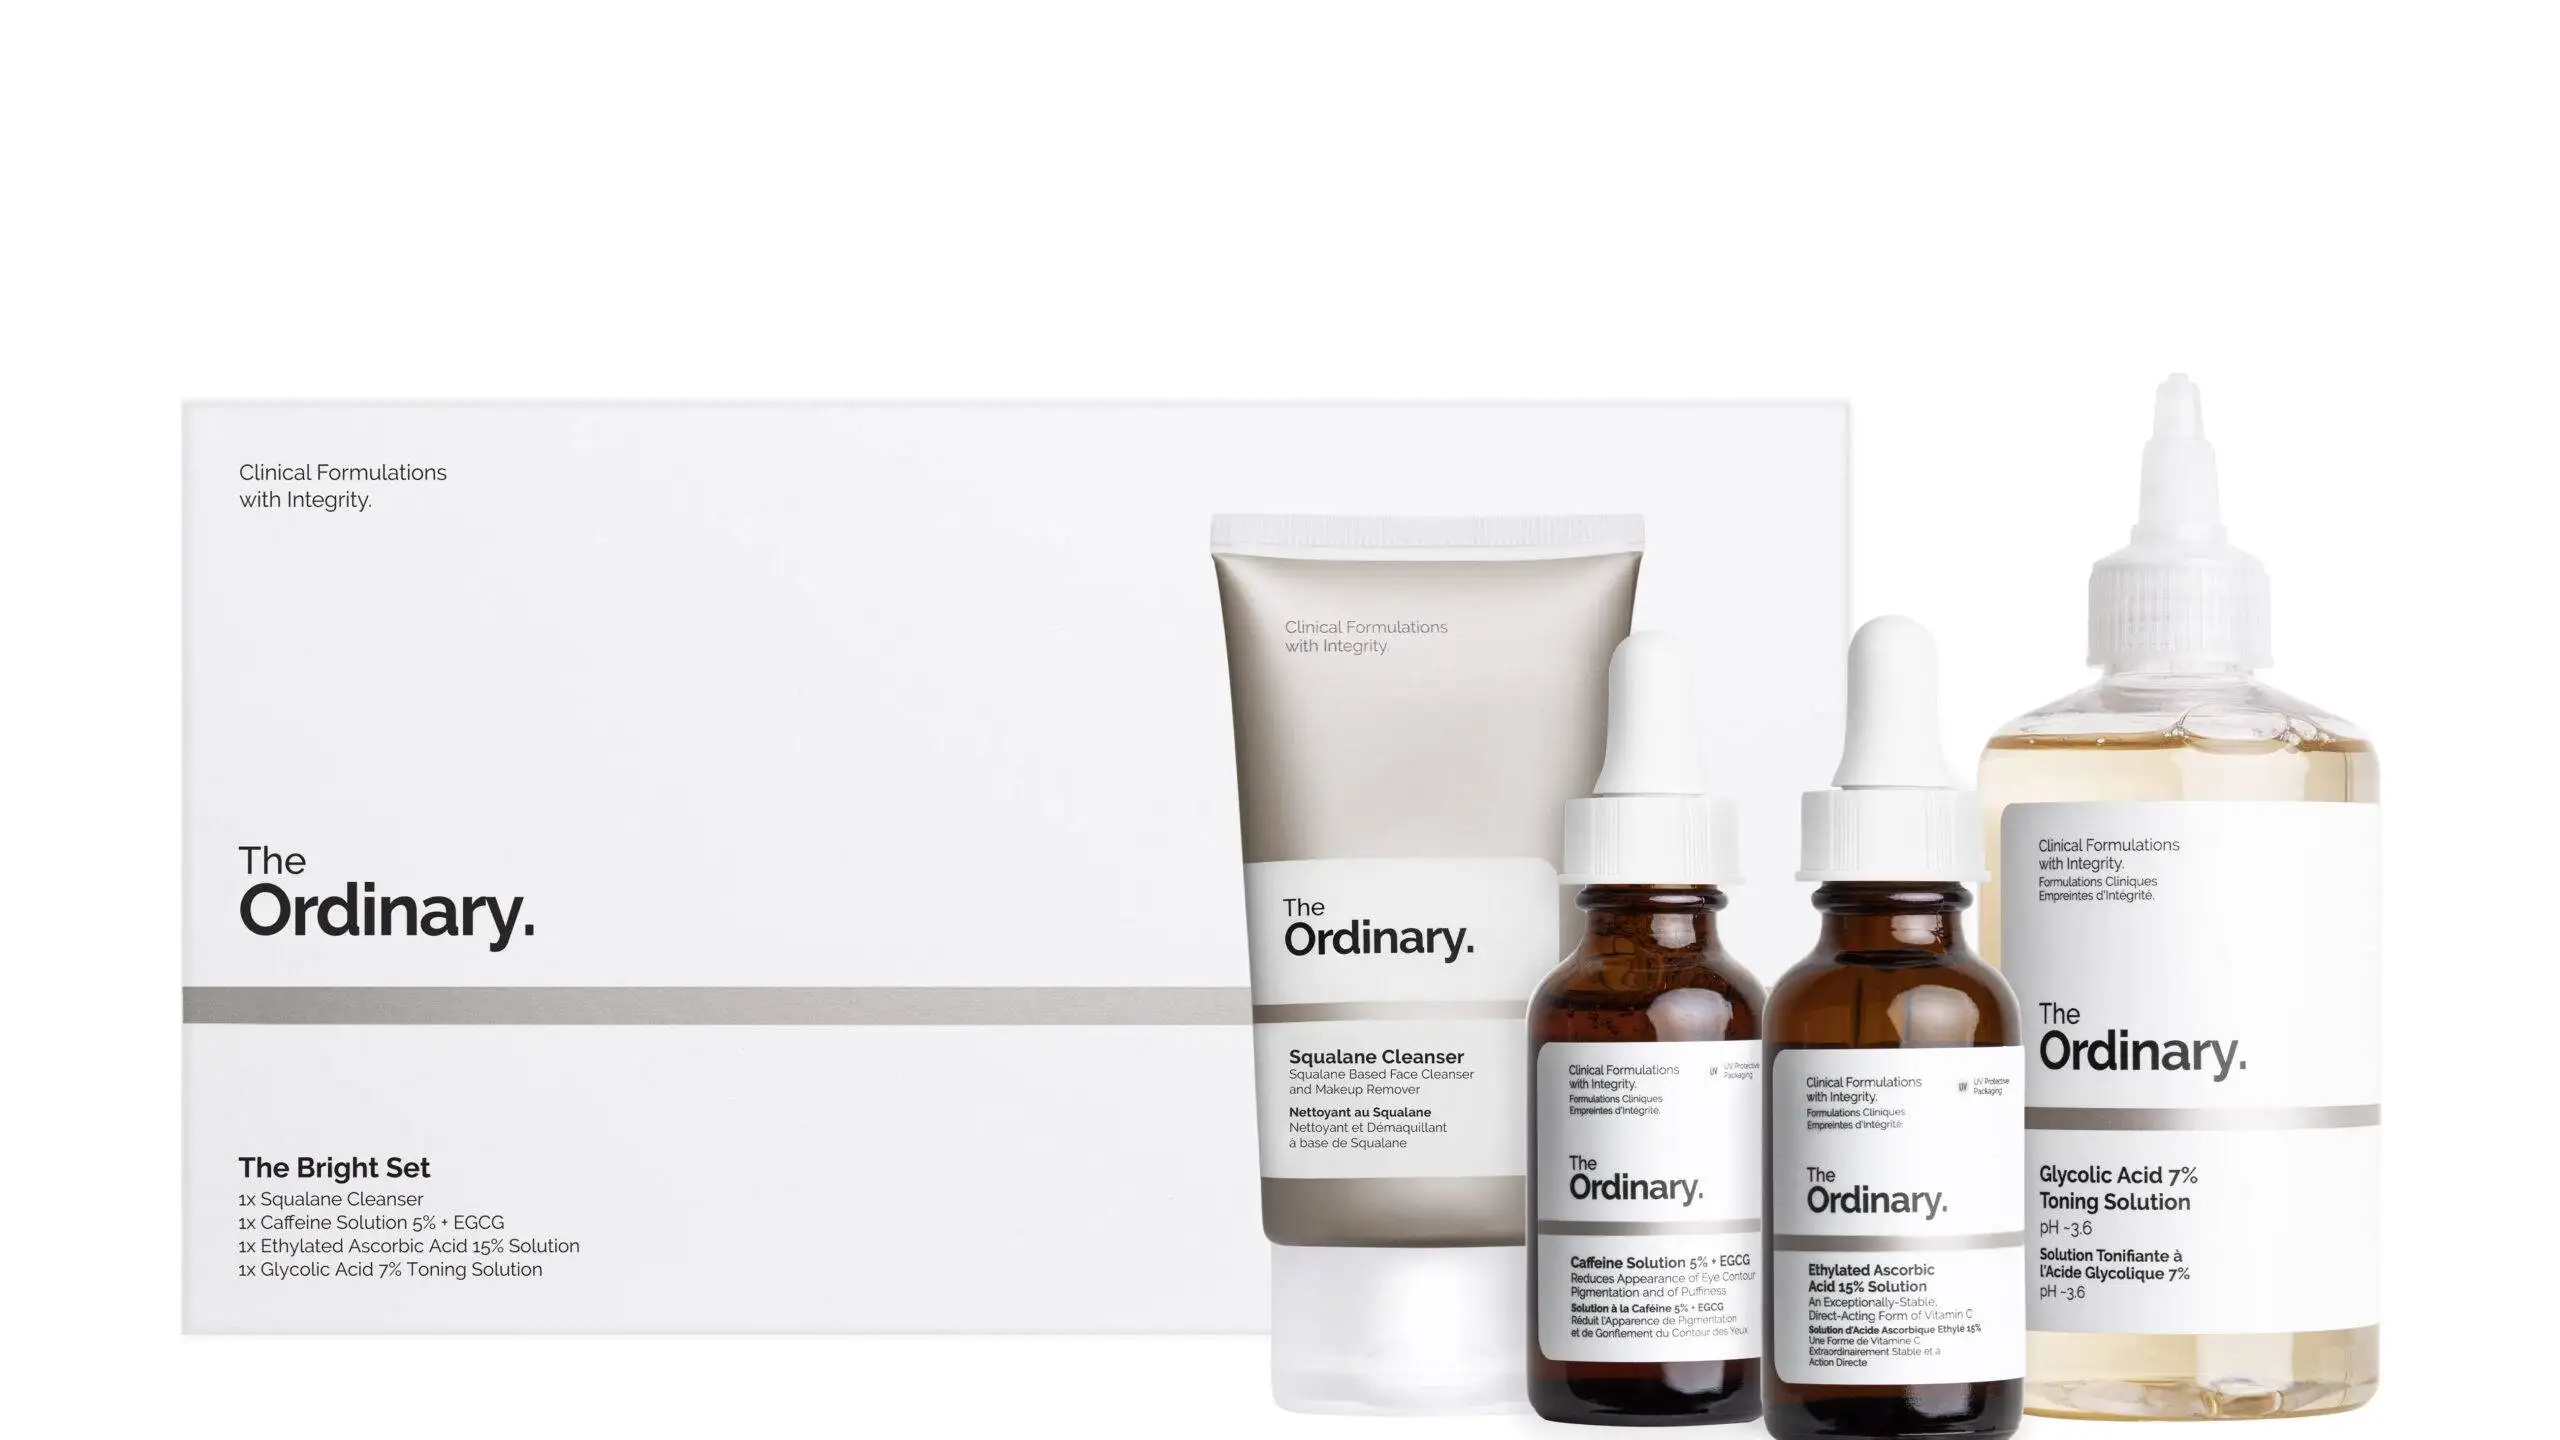 The Bright Set by The Ordinary